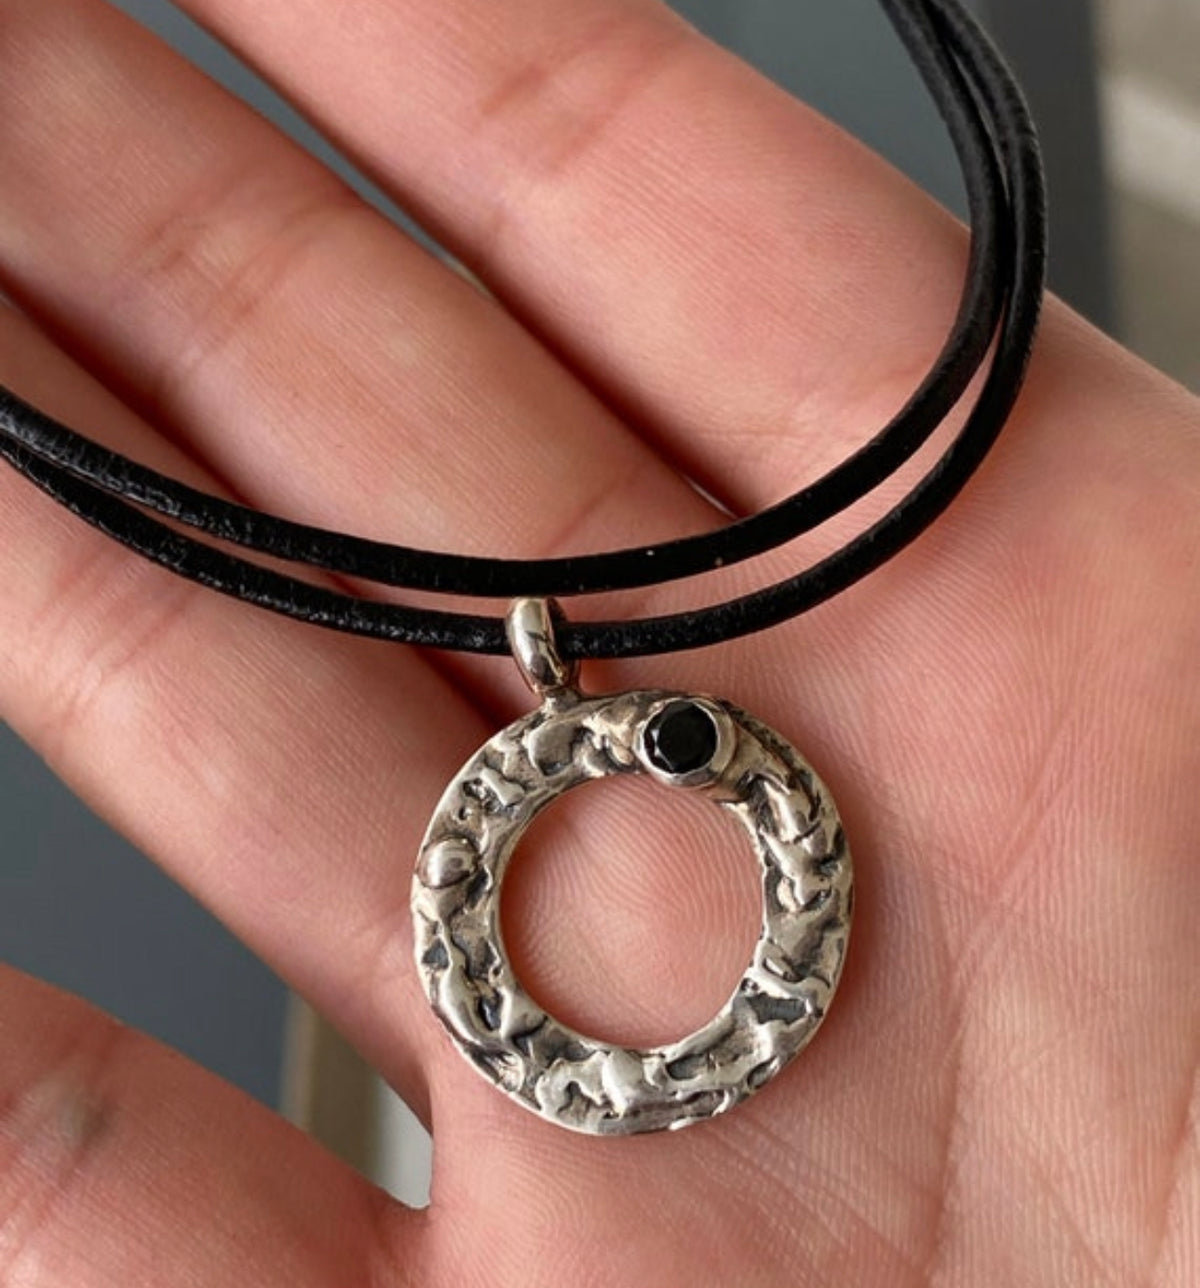 handmade circle necklace with a black gemstone